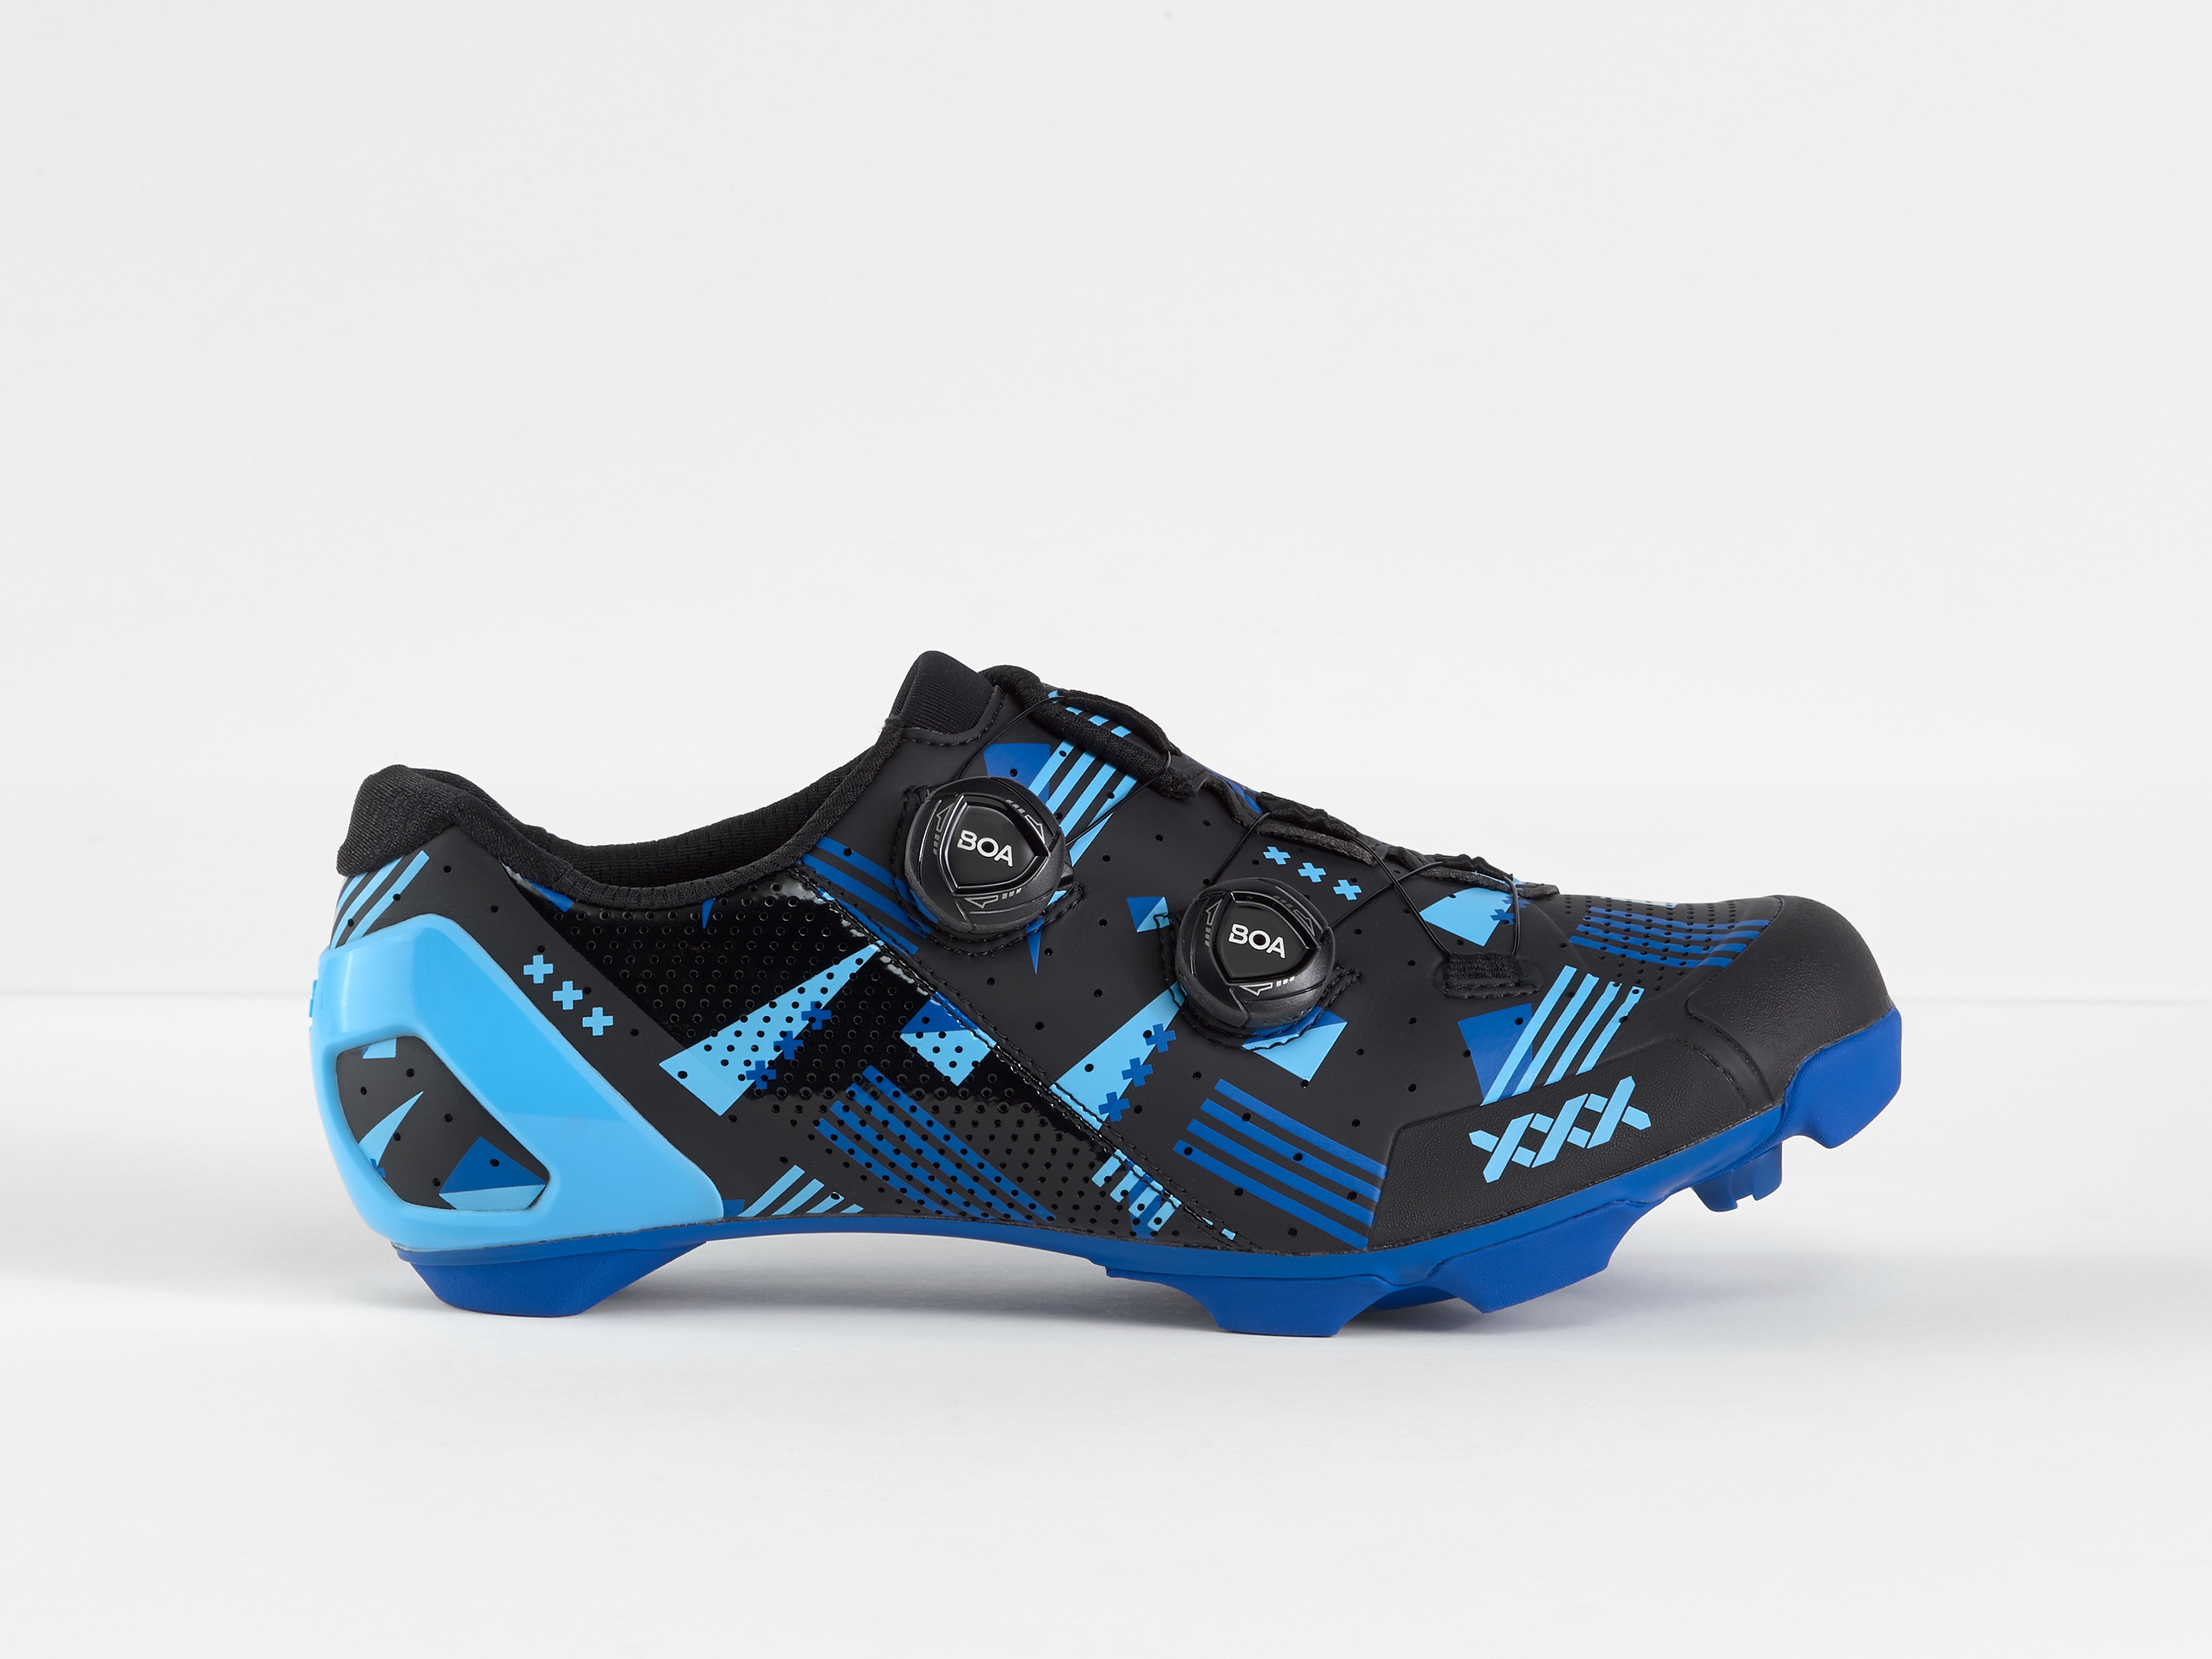 where can i buy cycling shoes near me